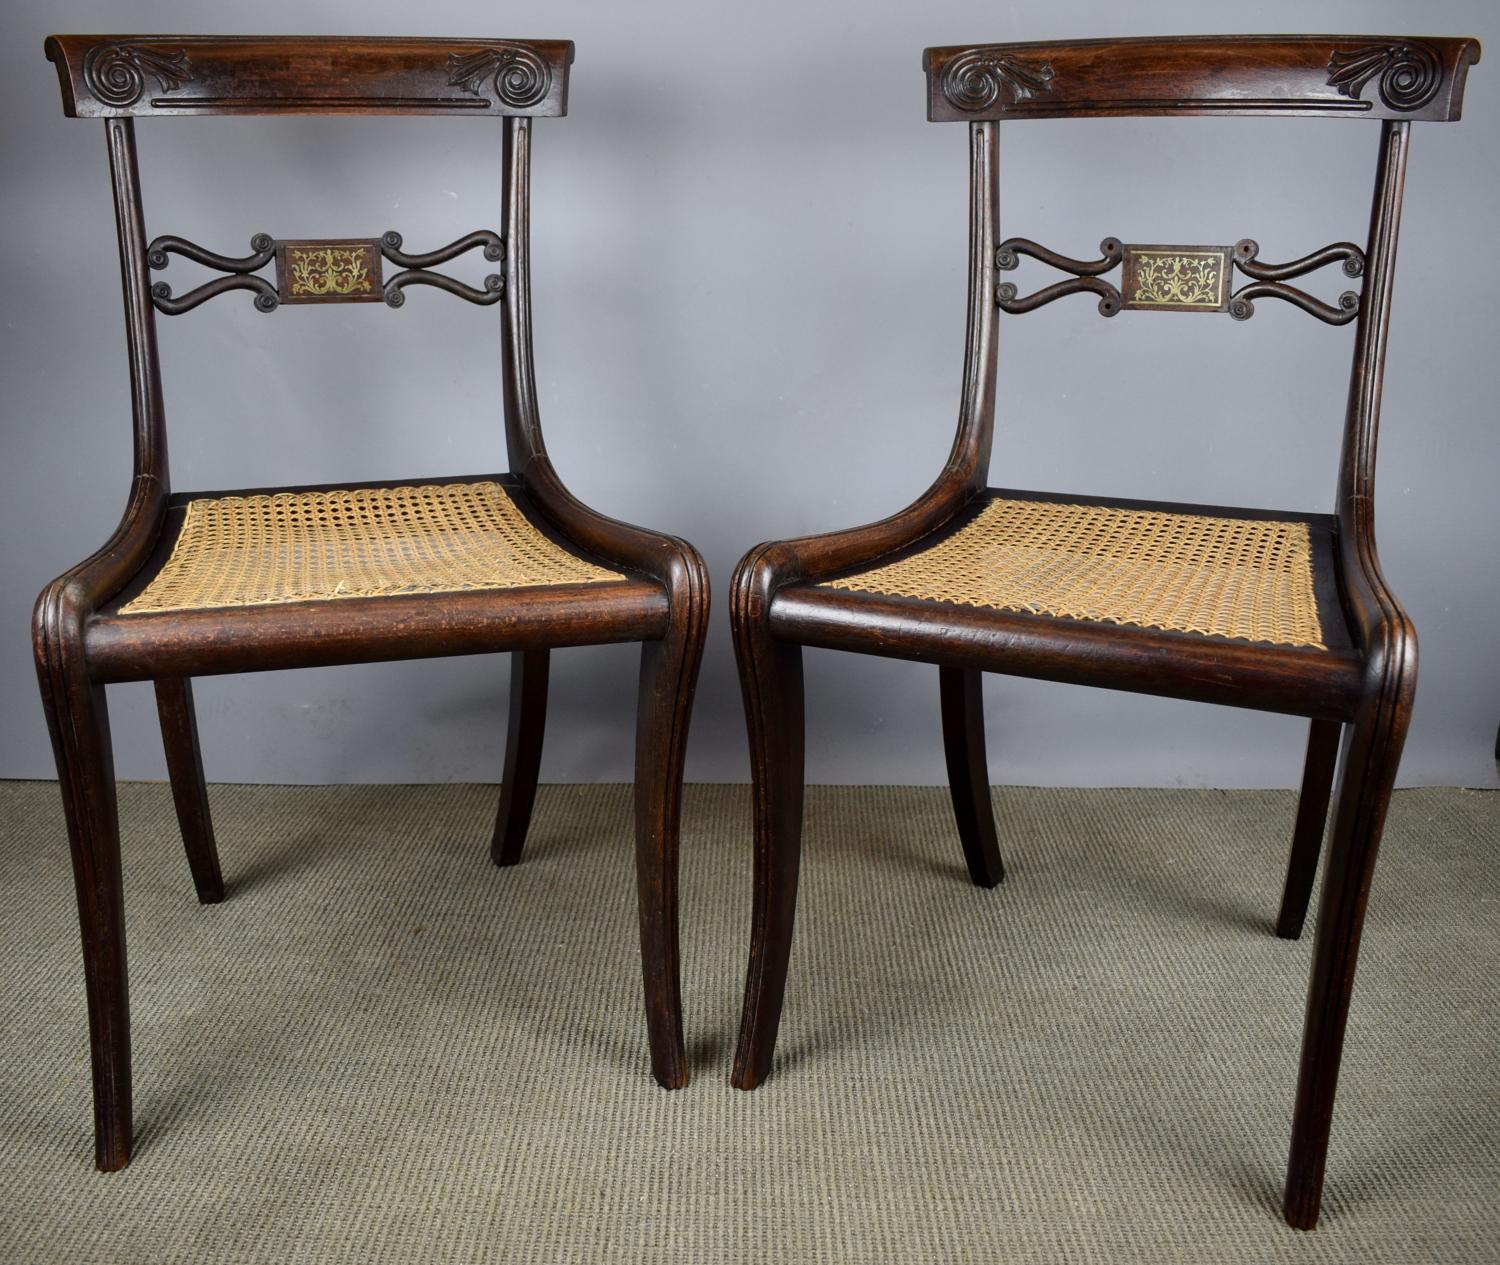 Pair of Regency Brass Inlaid Faux Rosewood Chairs